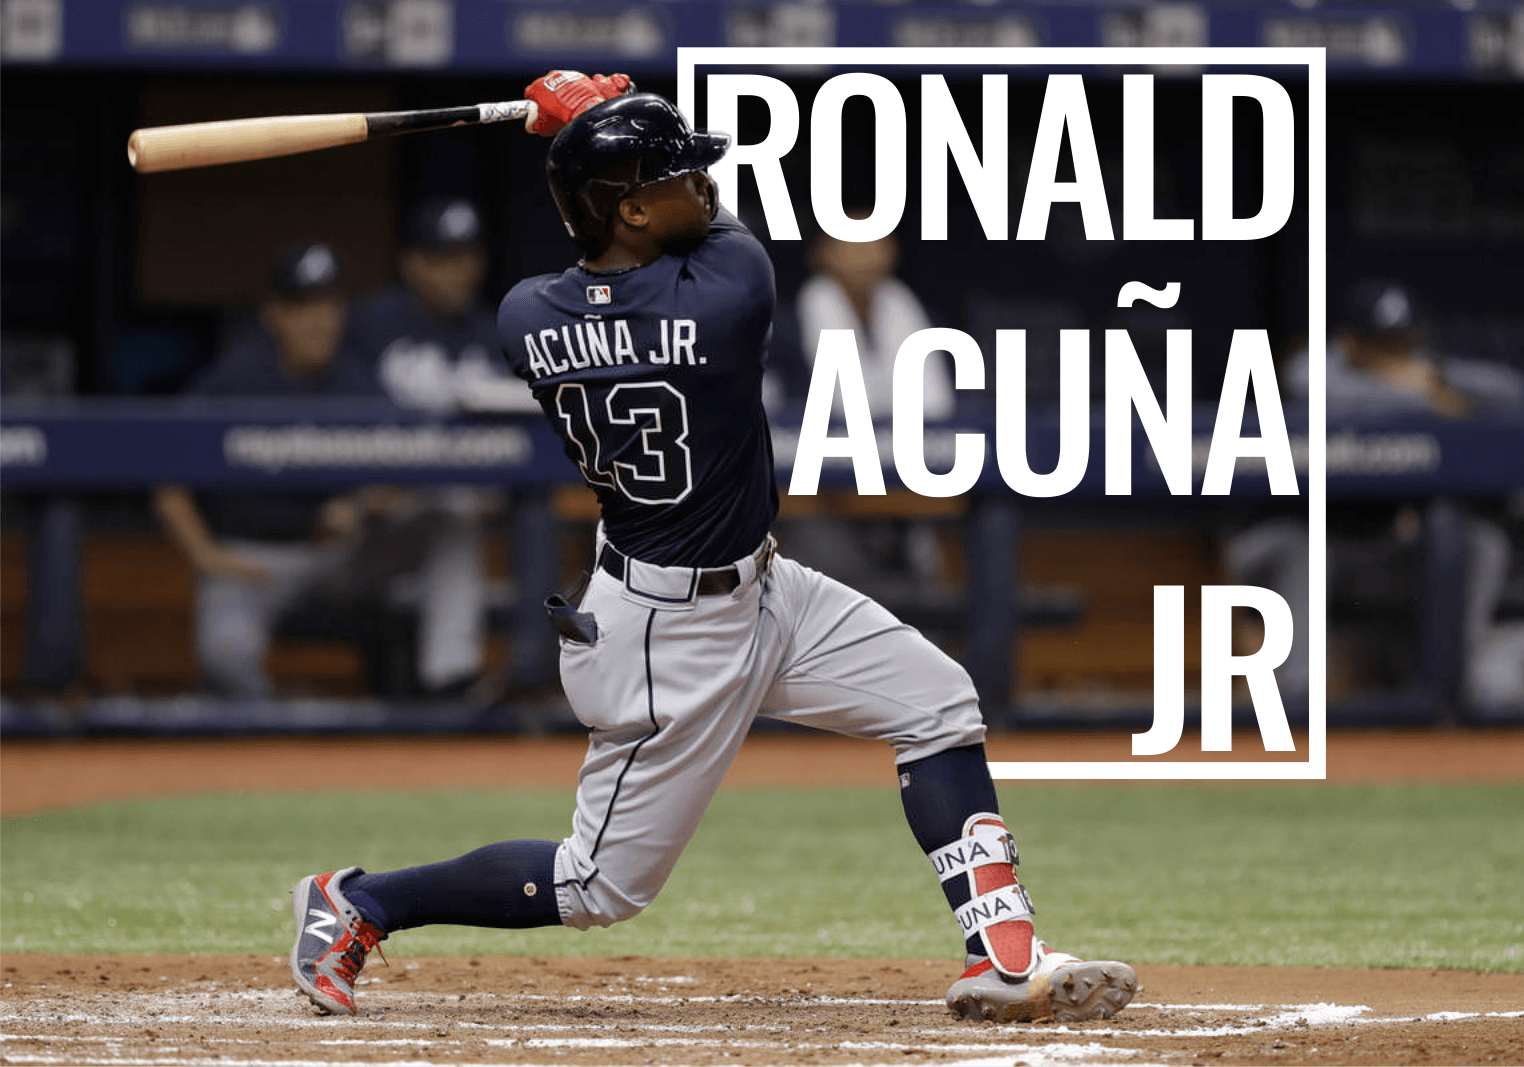 BAOGELI Ronald Acuna Jr Poster Baseball Portrait Canvas Bedroom Wall Art  Decor Picture Print Offices Dorm Room Decor Gifts  Unframe12x18inch30x45cm  Amazonca Home